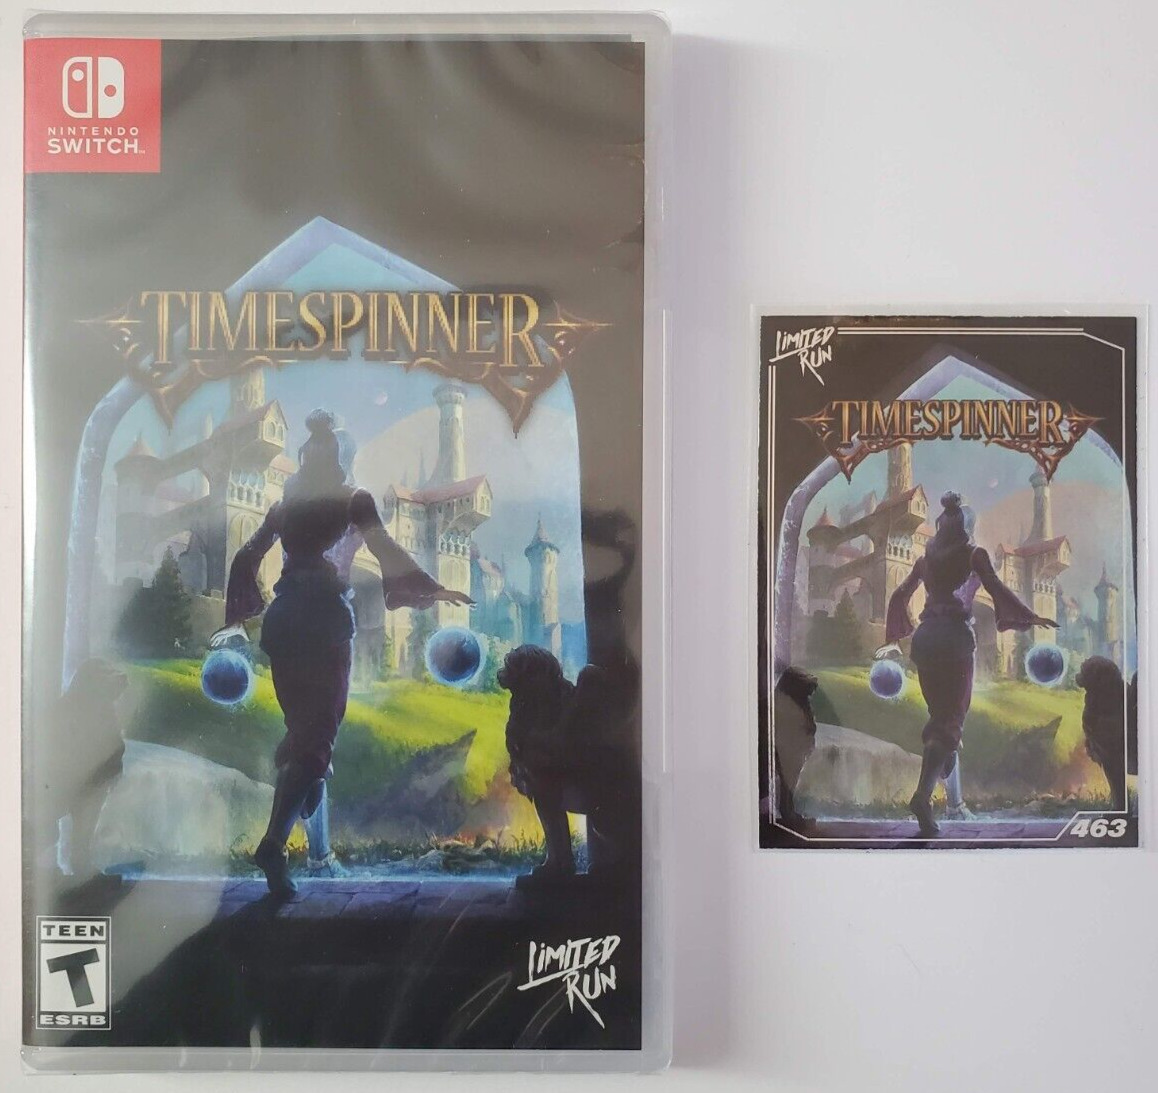 NEW Timespinner Nintendo Switch Limited Run Games #42 w/card #463 FREE SHIPPING